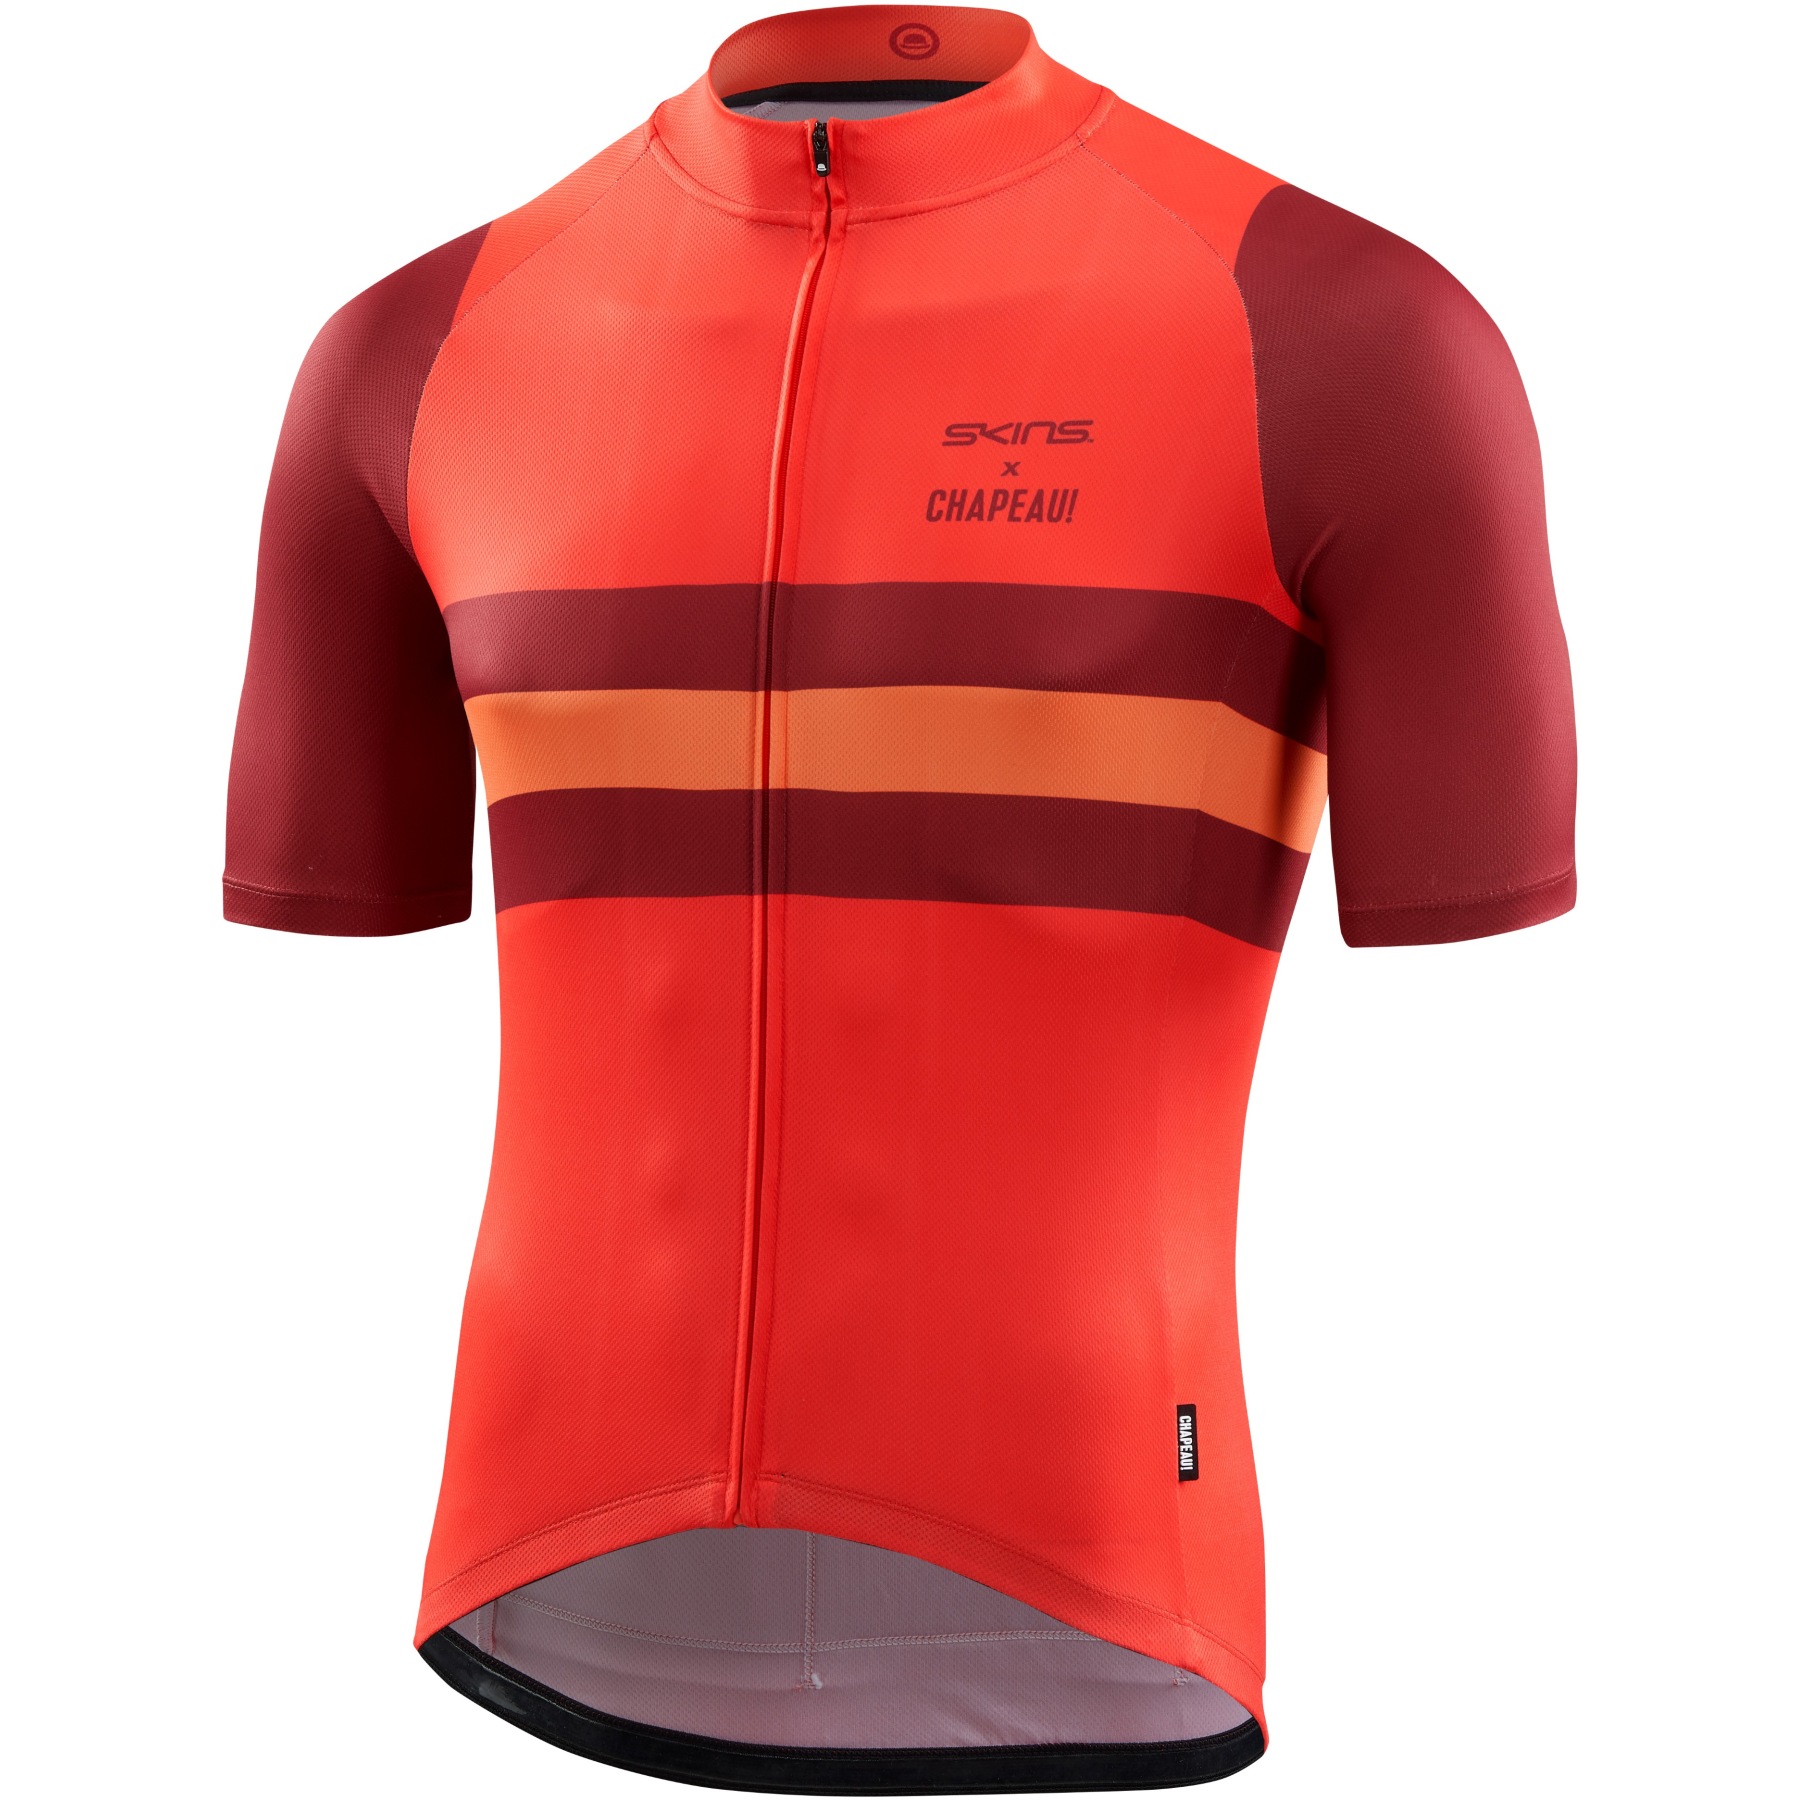 Picture of SKINS CYCLE X CHAPEAU Bike Jersey - Bright Red